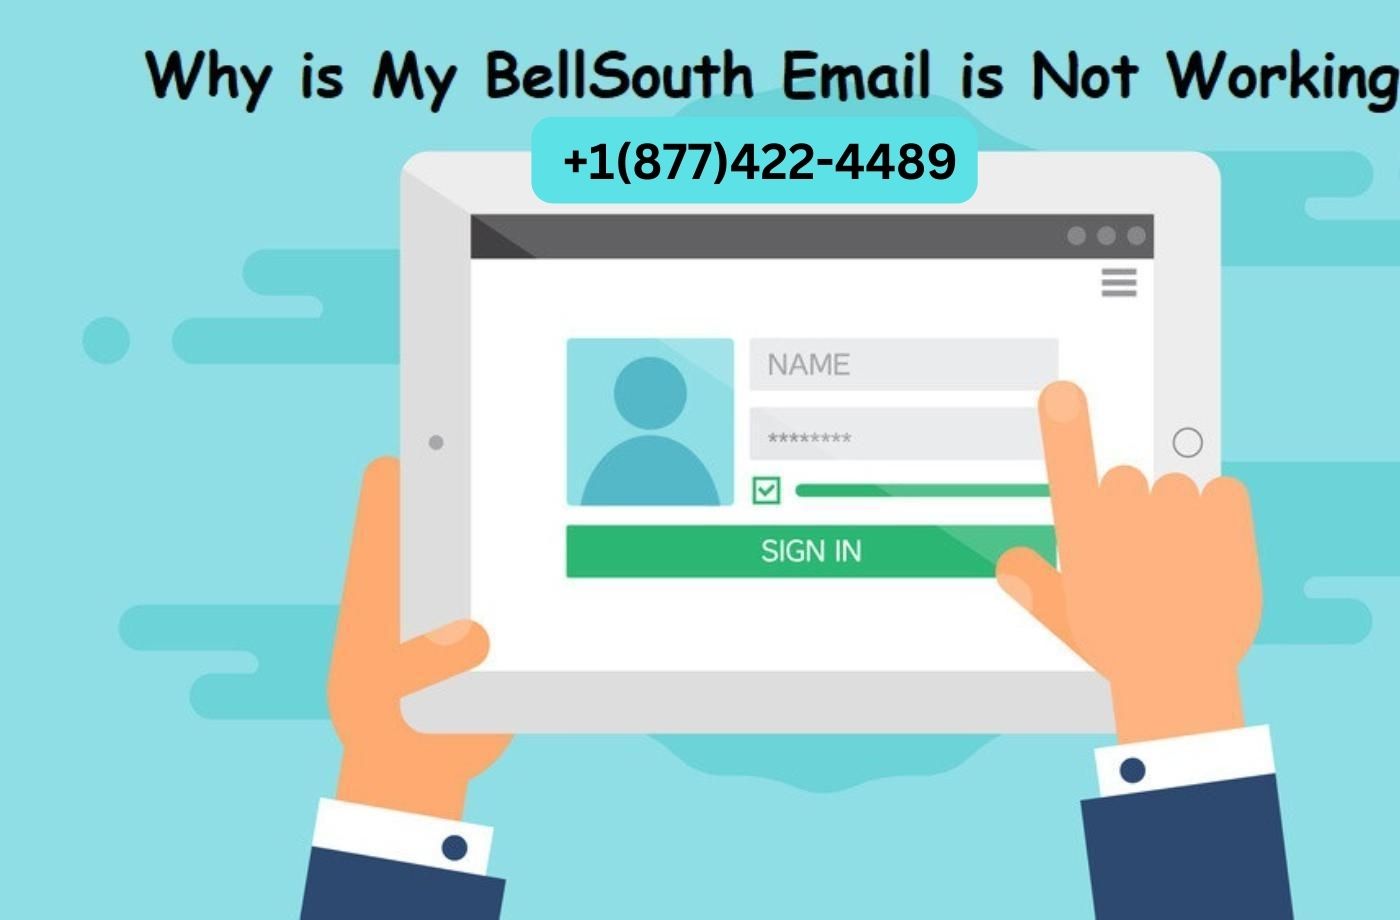 Why is my Bellsouth email not working? - New Jersey - Jersey City ID1525974